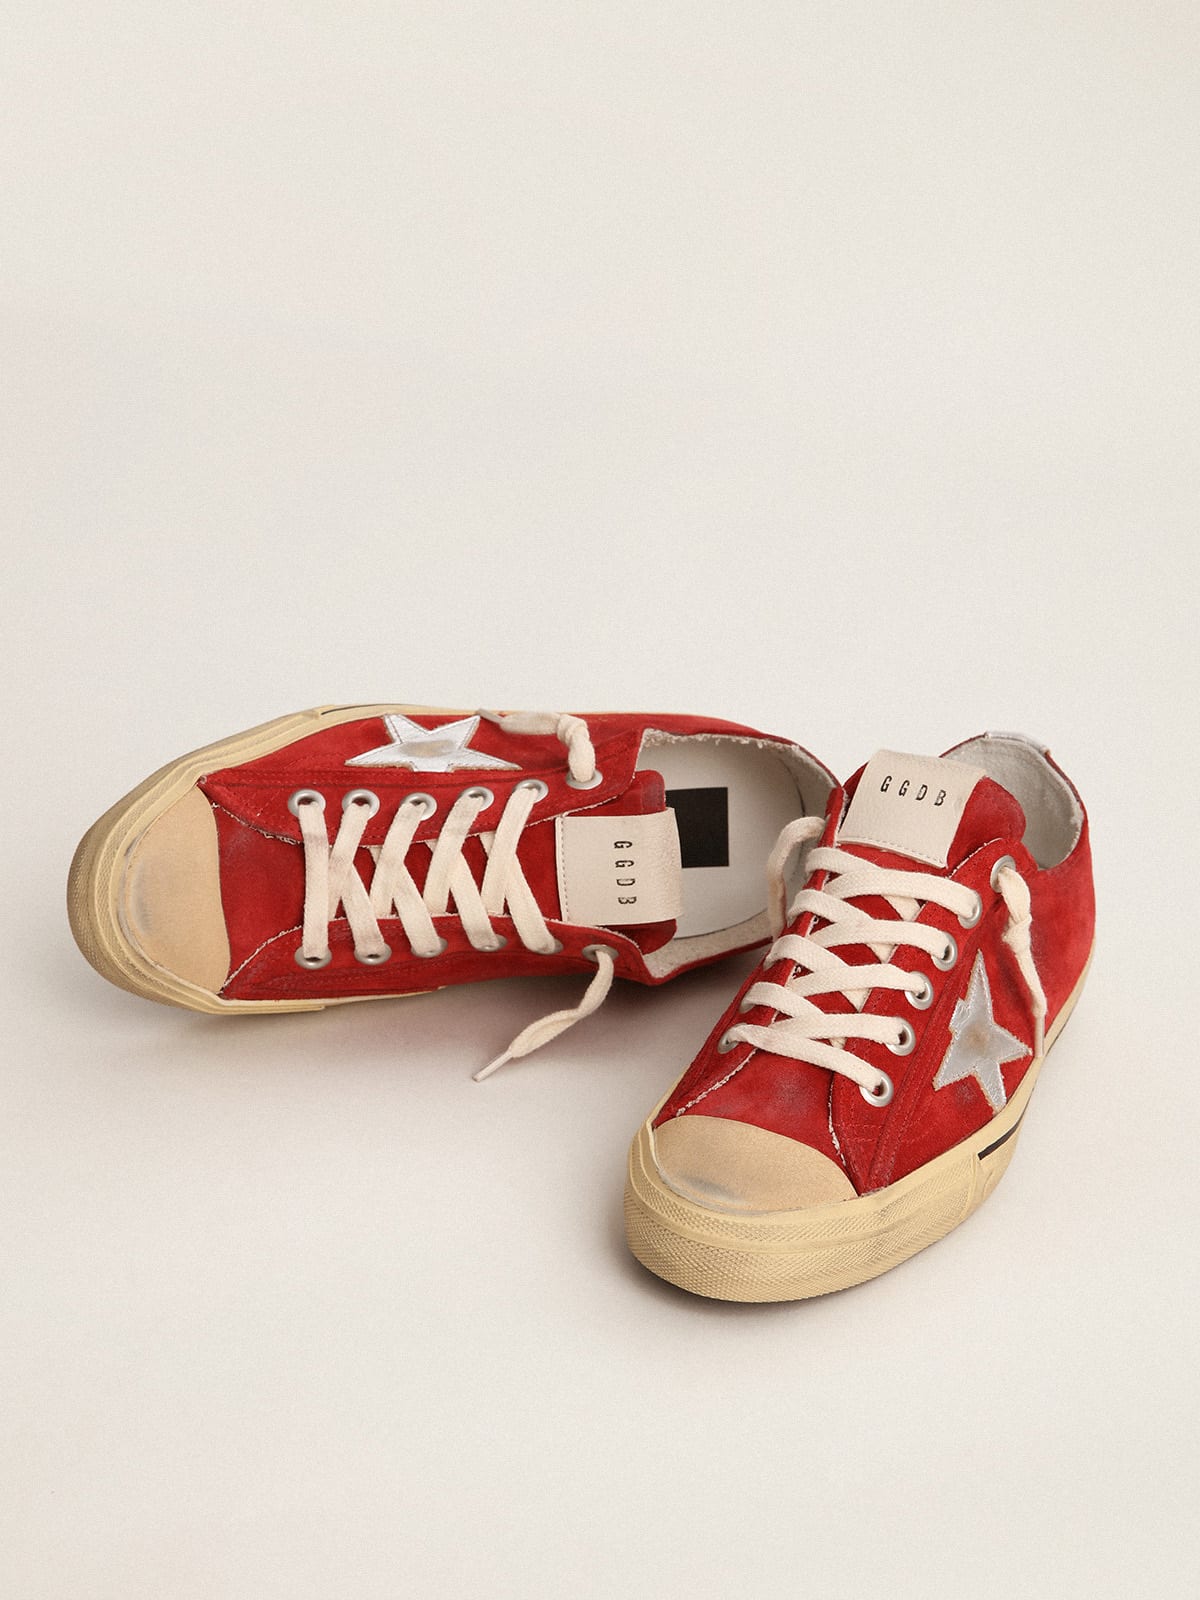 Golden Goose - V-Star LTD sneakers in dark red suede with silver metallic leather star in 